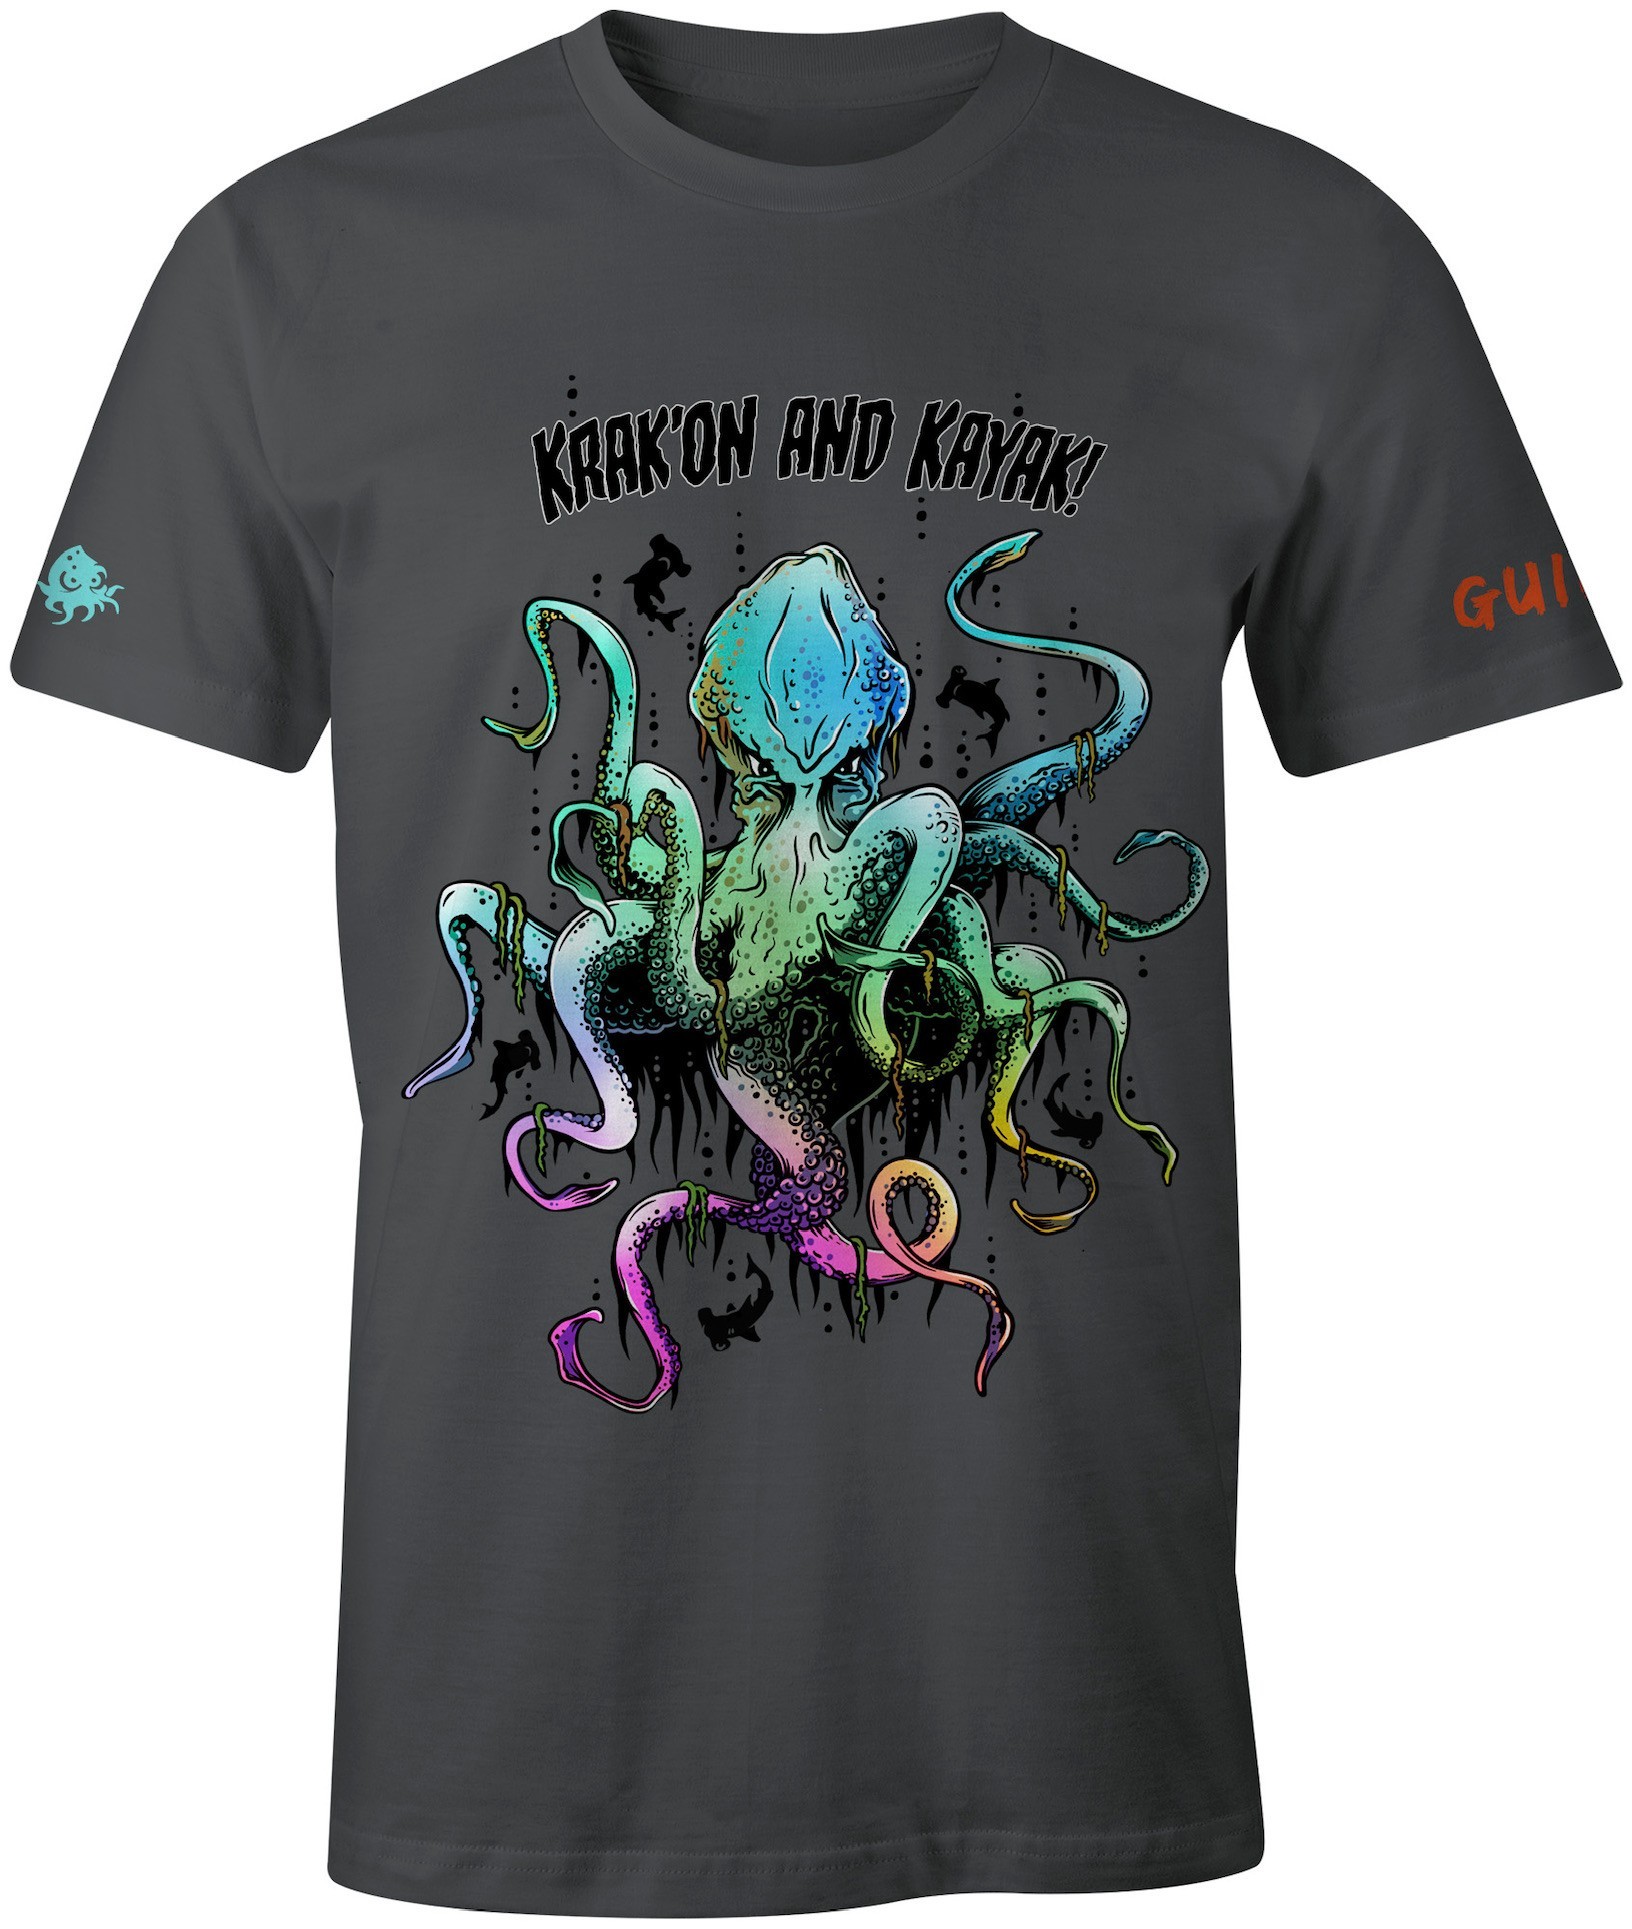 Grey short sleeve merchandise t-shirts with Kevin the Krakon on front